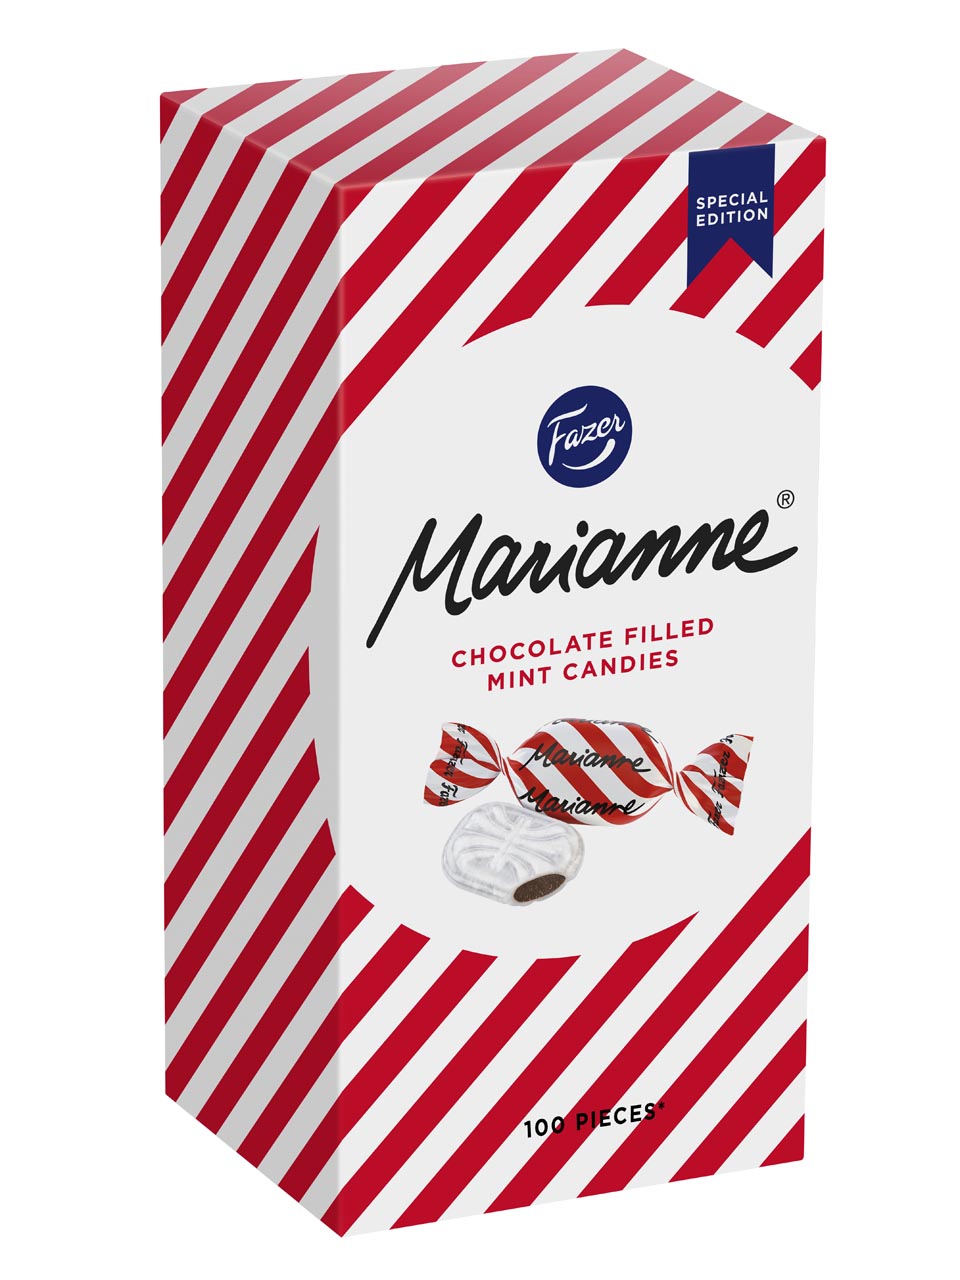 Marianne 500g Peppermint candies filled with chocolate null - onesize - 1